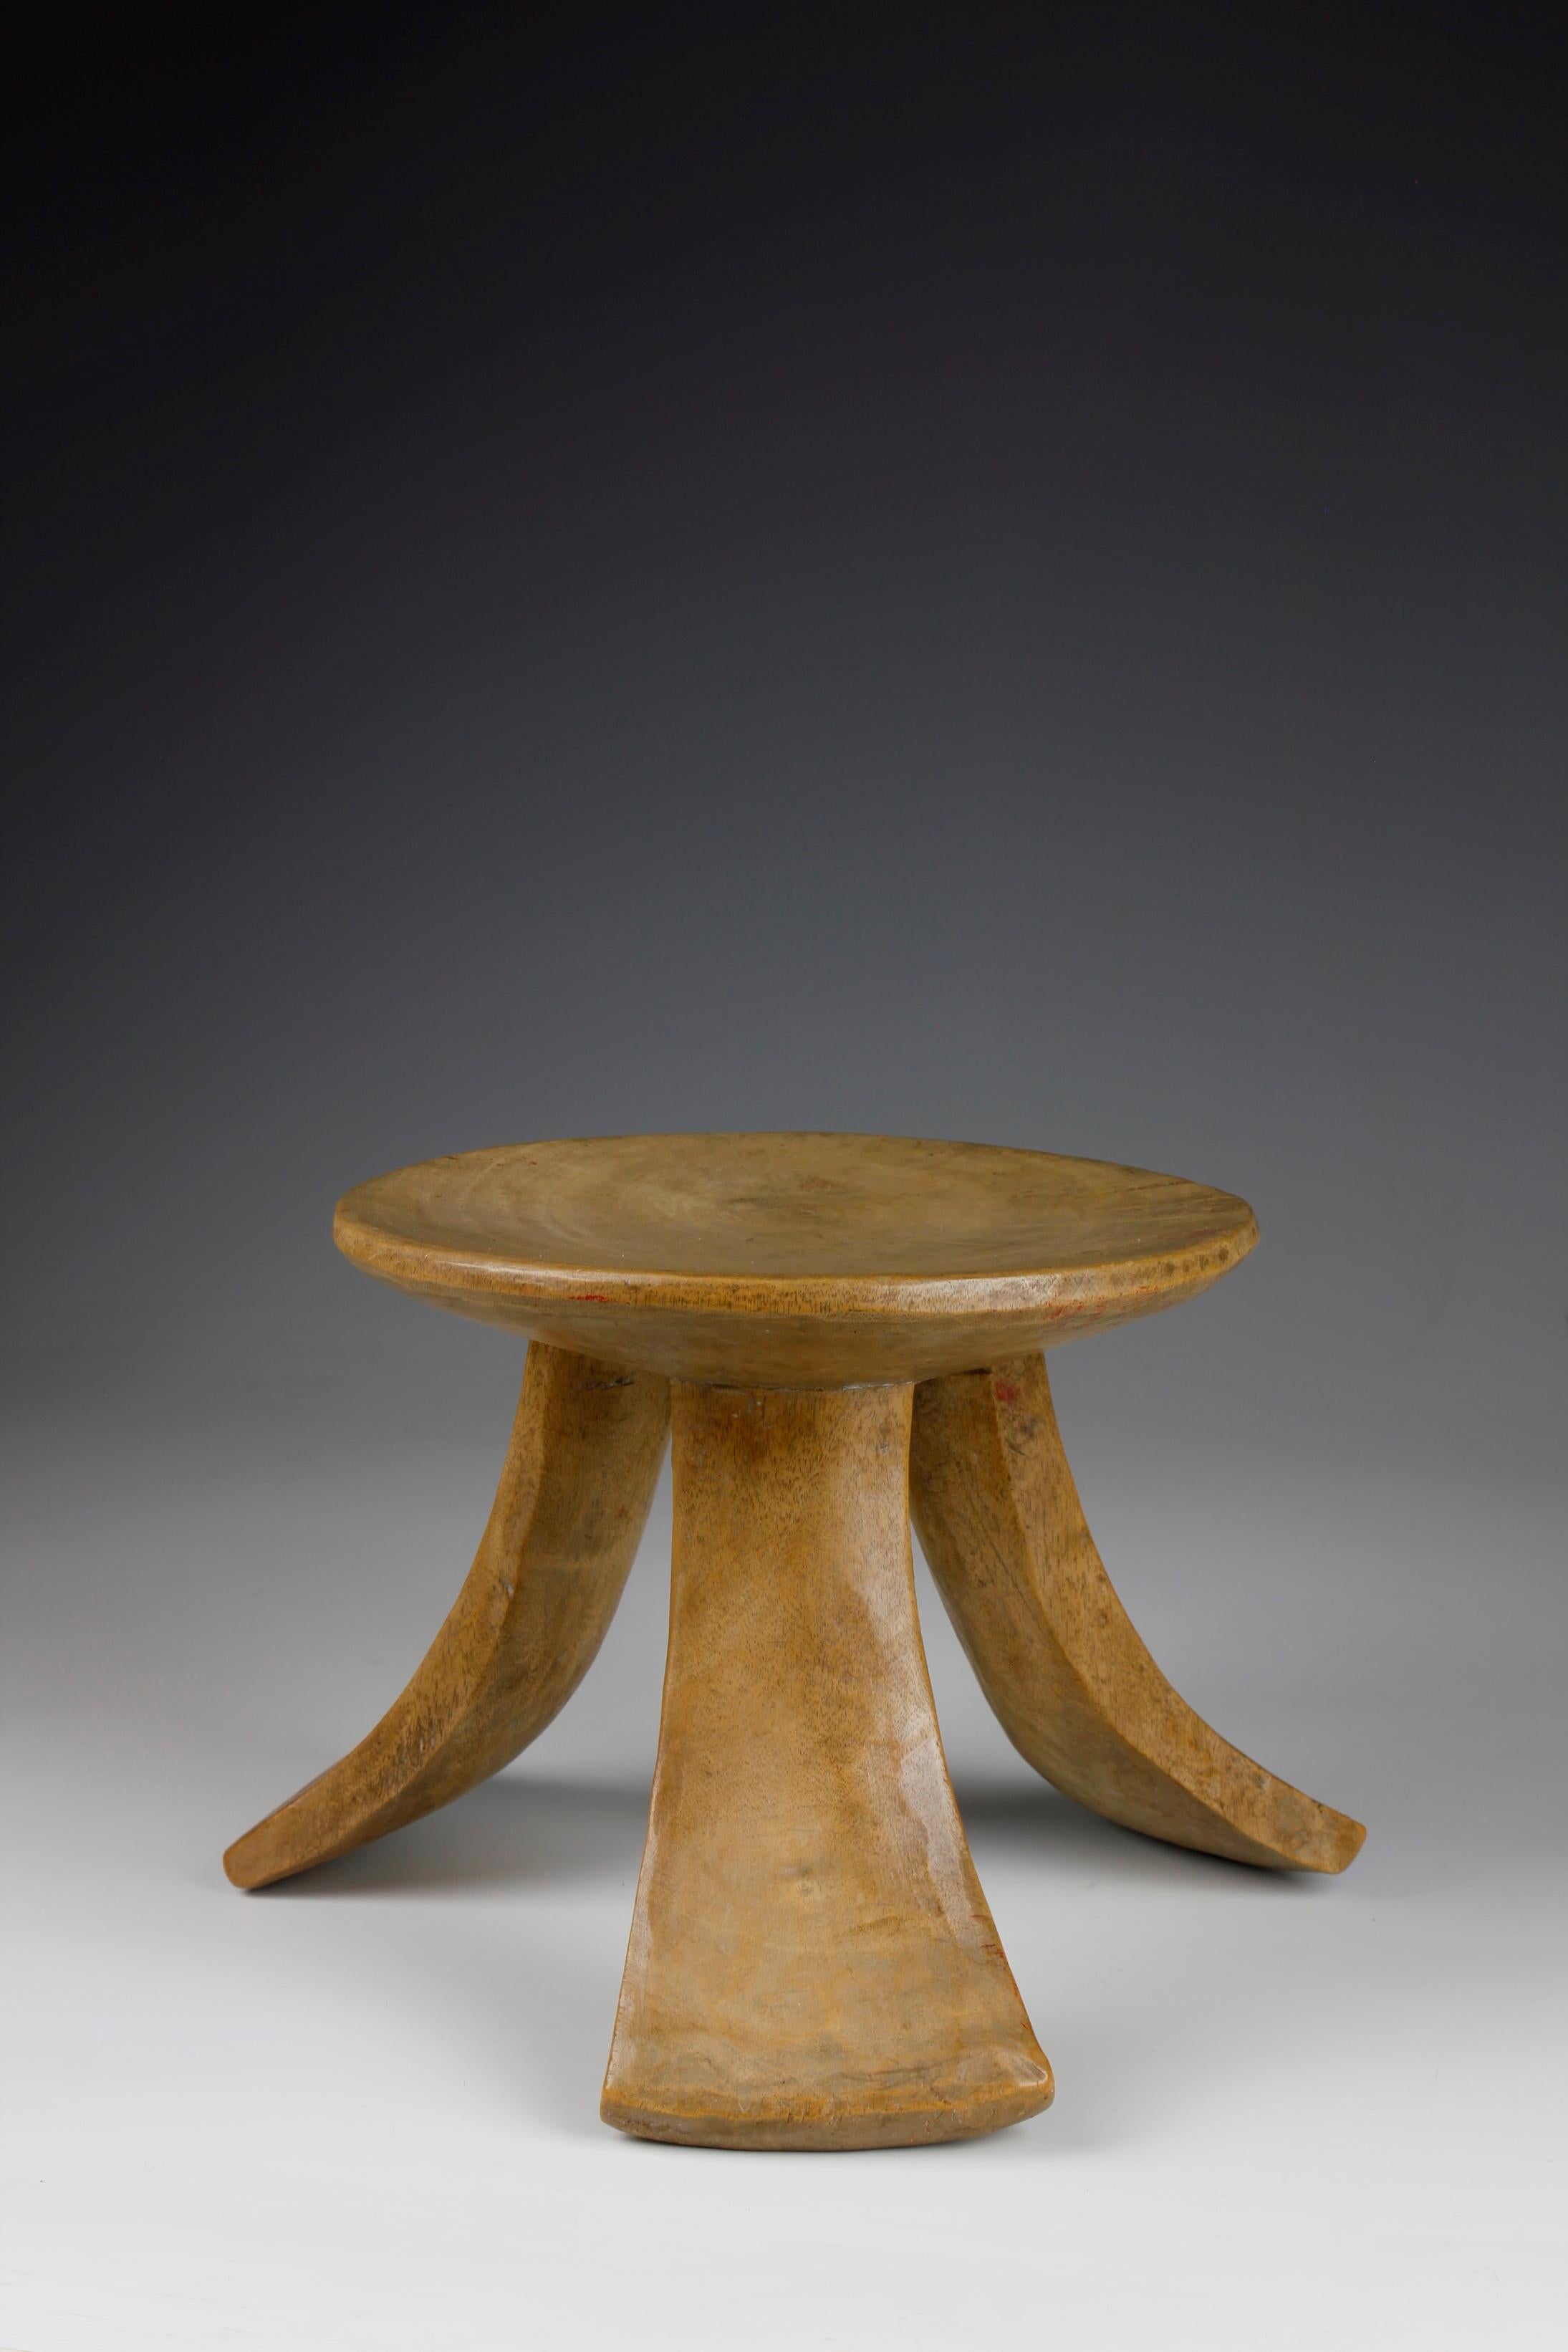 The form of this early twentieth-century Pokot stool from Kenya exhibits a beautiful sculptural quality, in which three curved, flared and flattened legs support the flat circular seat. 

Small, three-legged stools such as this were carried and used